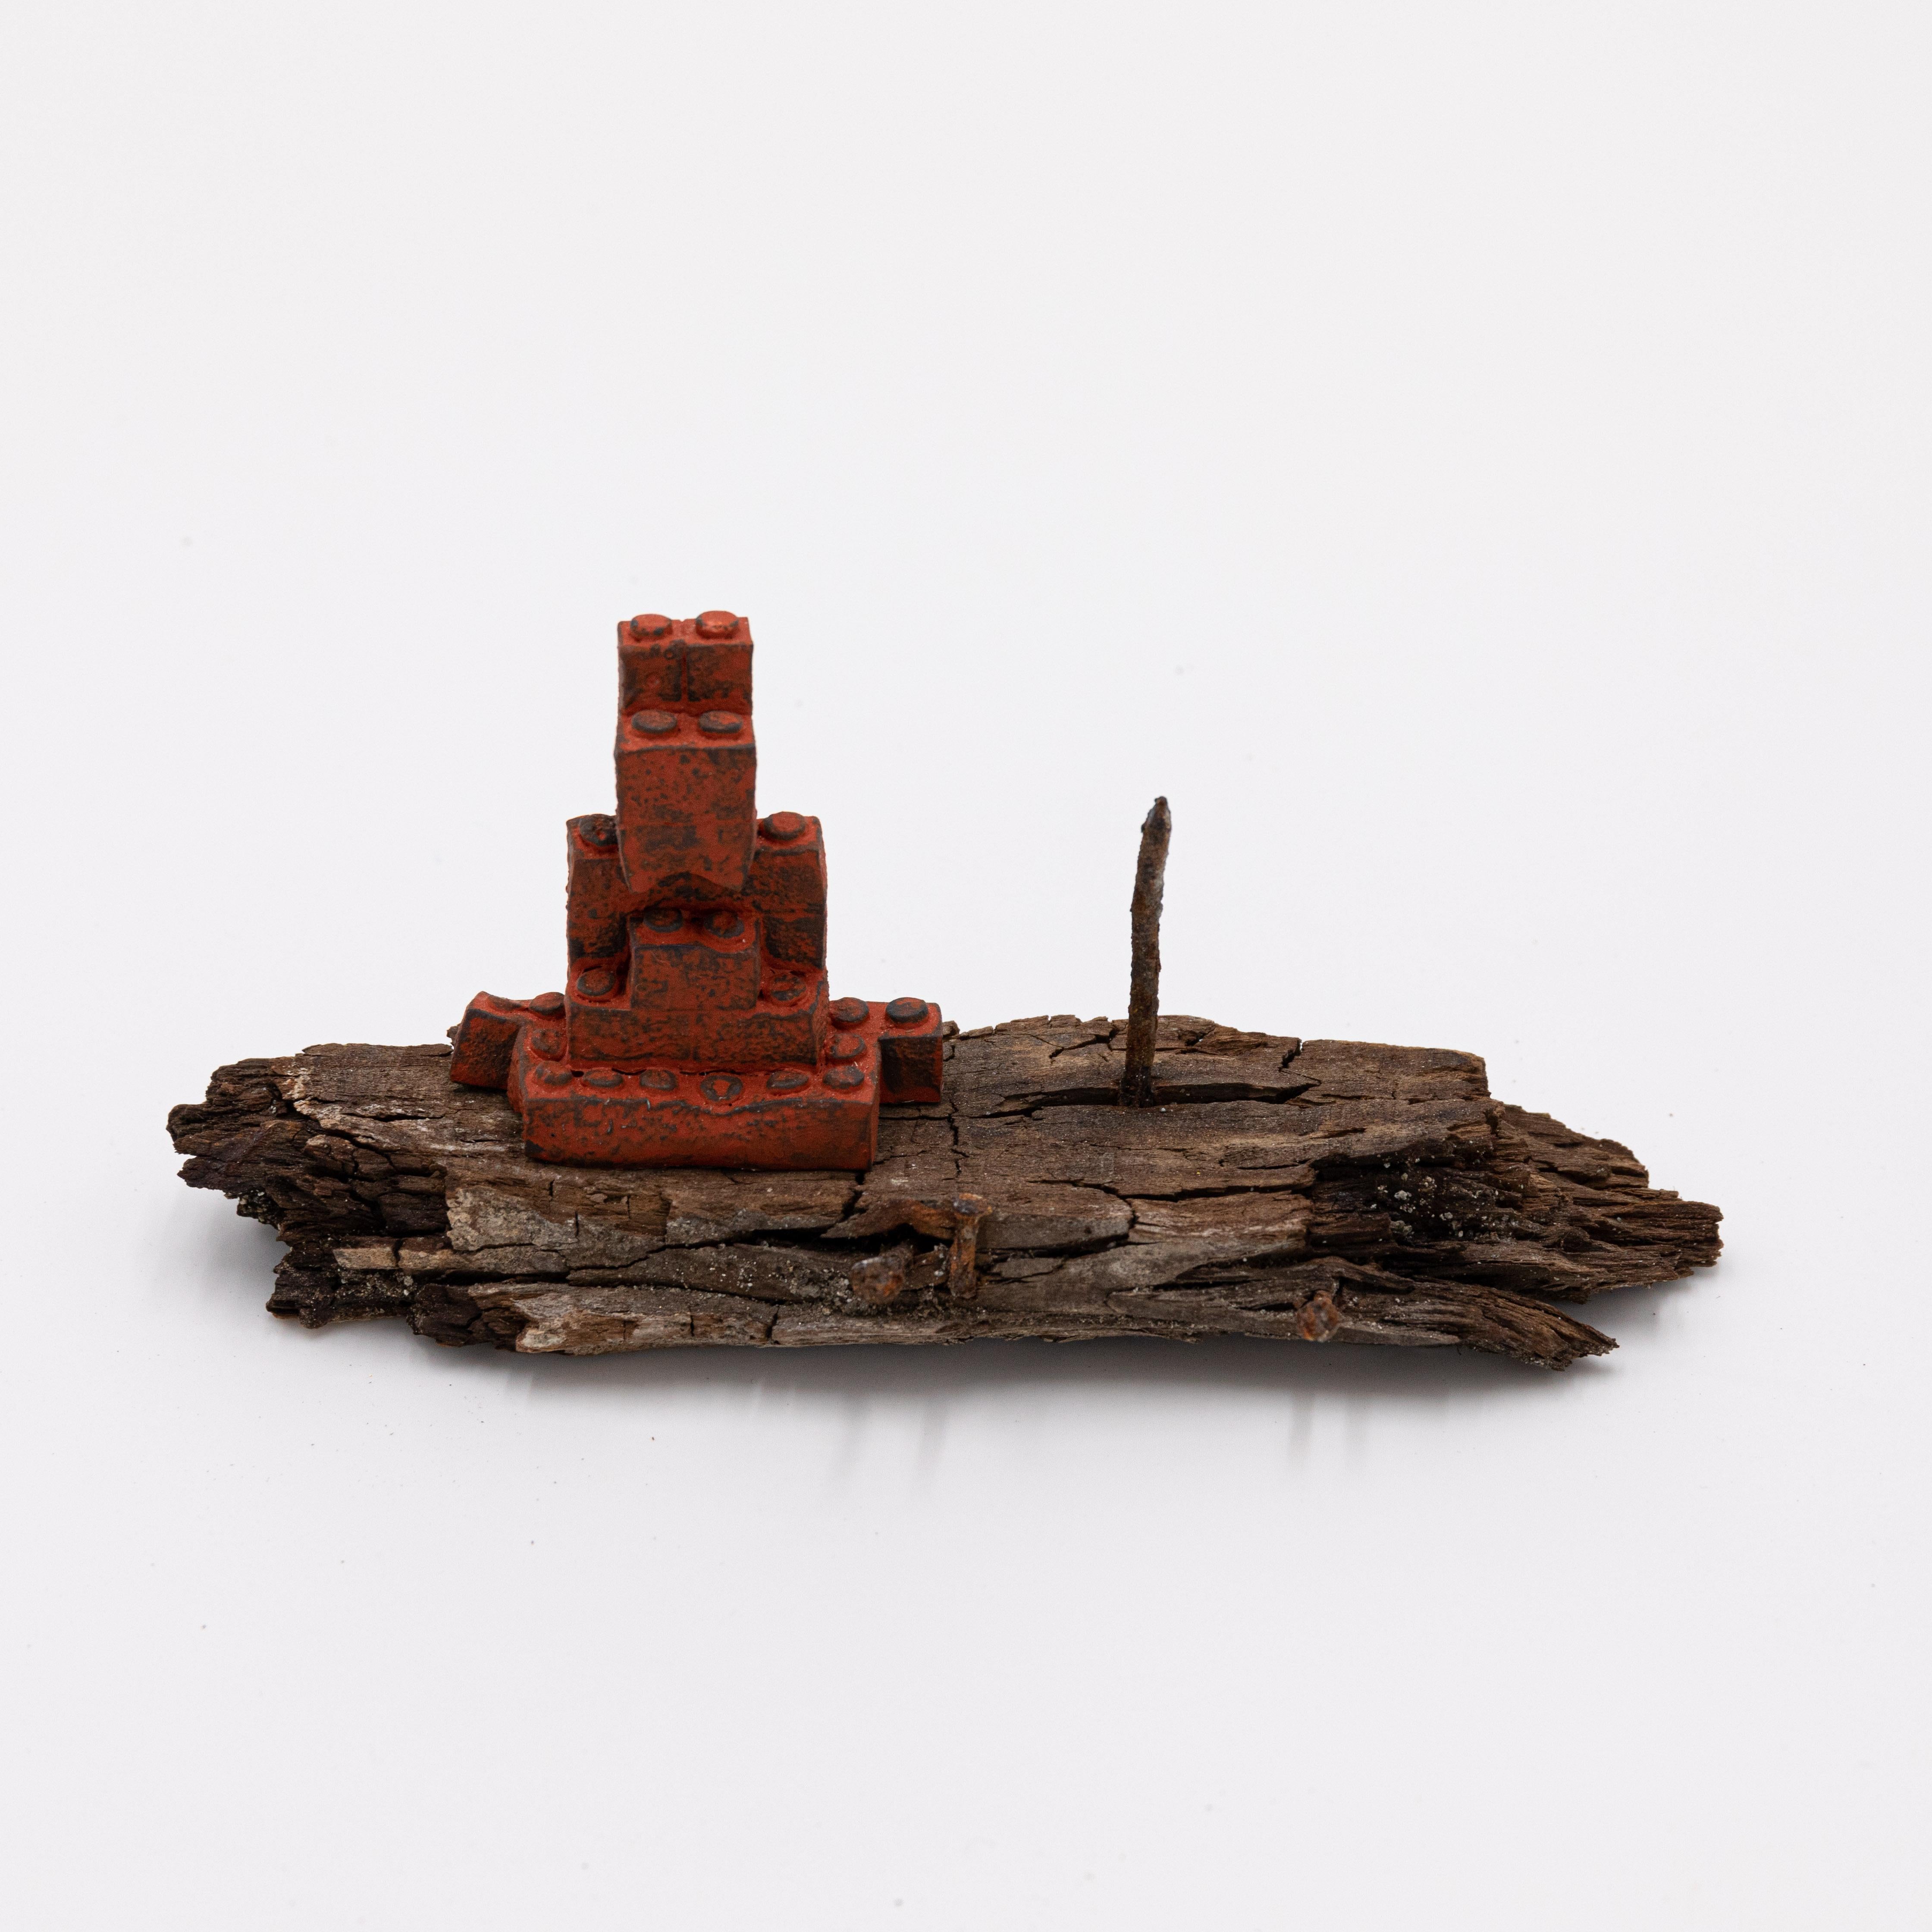 Lego, discarded wood, gilder’s bole

This work was created for an exhibit as part of the artistic unit SHIKŌ, a collaborative effort between sculptors Kanji Hasegawa, Isaji Yugo, and Kojun.

The pieces transform everyday items into alters, reminding